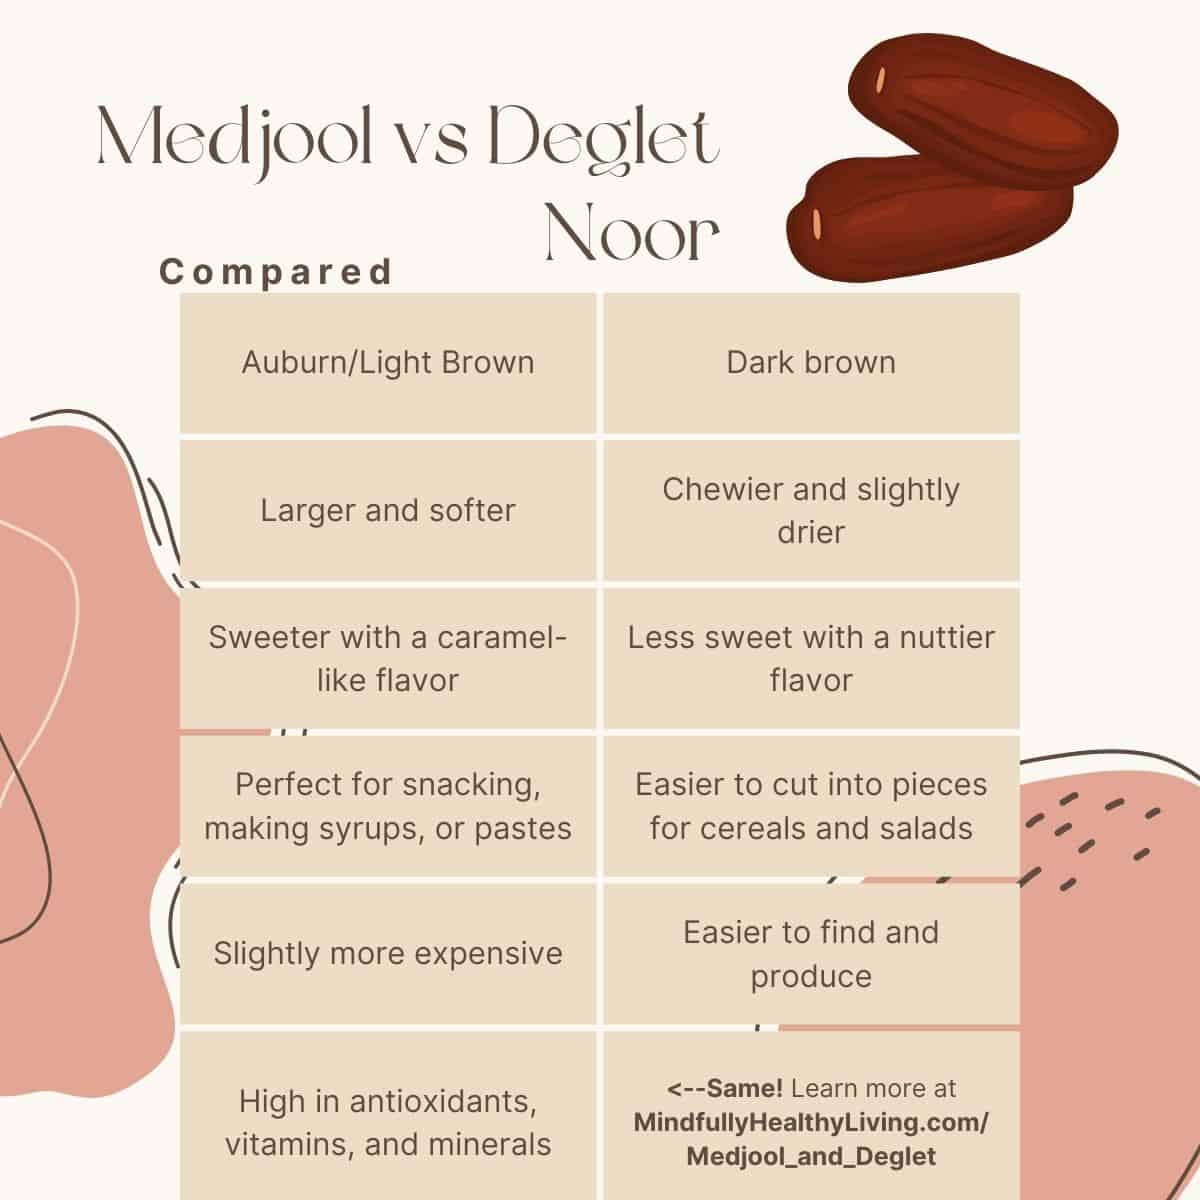 An infographic with a drawing of two red dates at the top right and 12 light tan rectangles in two columns and 6 rows with pink dates in the backbground behind the rectangles on a cream backdrop. in dark brown cursive bold type at the top reads Medjool vs Deglet Noor and underneath that in print says Compared. The columns read top to bottom left to right, Auburn/Light Brown on the left and Dark brown on the right. Next is Larger and softer on the left and Chewier and slightly drier on the right. Next, is Sweeter with a caramel-like flavor on the left and Less sweet with a nuttier flavor on the right. Next is Perfect for snacking, making syrups, or pastes, on the right says Easier to cut into pieces for cereals and salads. Next row says Slightly more expensive on the left and Easier to find and produce on the right. Last says High in antioxidants, vitamins, and minerals on the left. on the right has an arrow pointing left in bold says Same! in non bold says Learn more at and in bold says mindfullyhealthyliving.com/Medjool_and_deglet